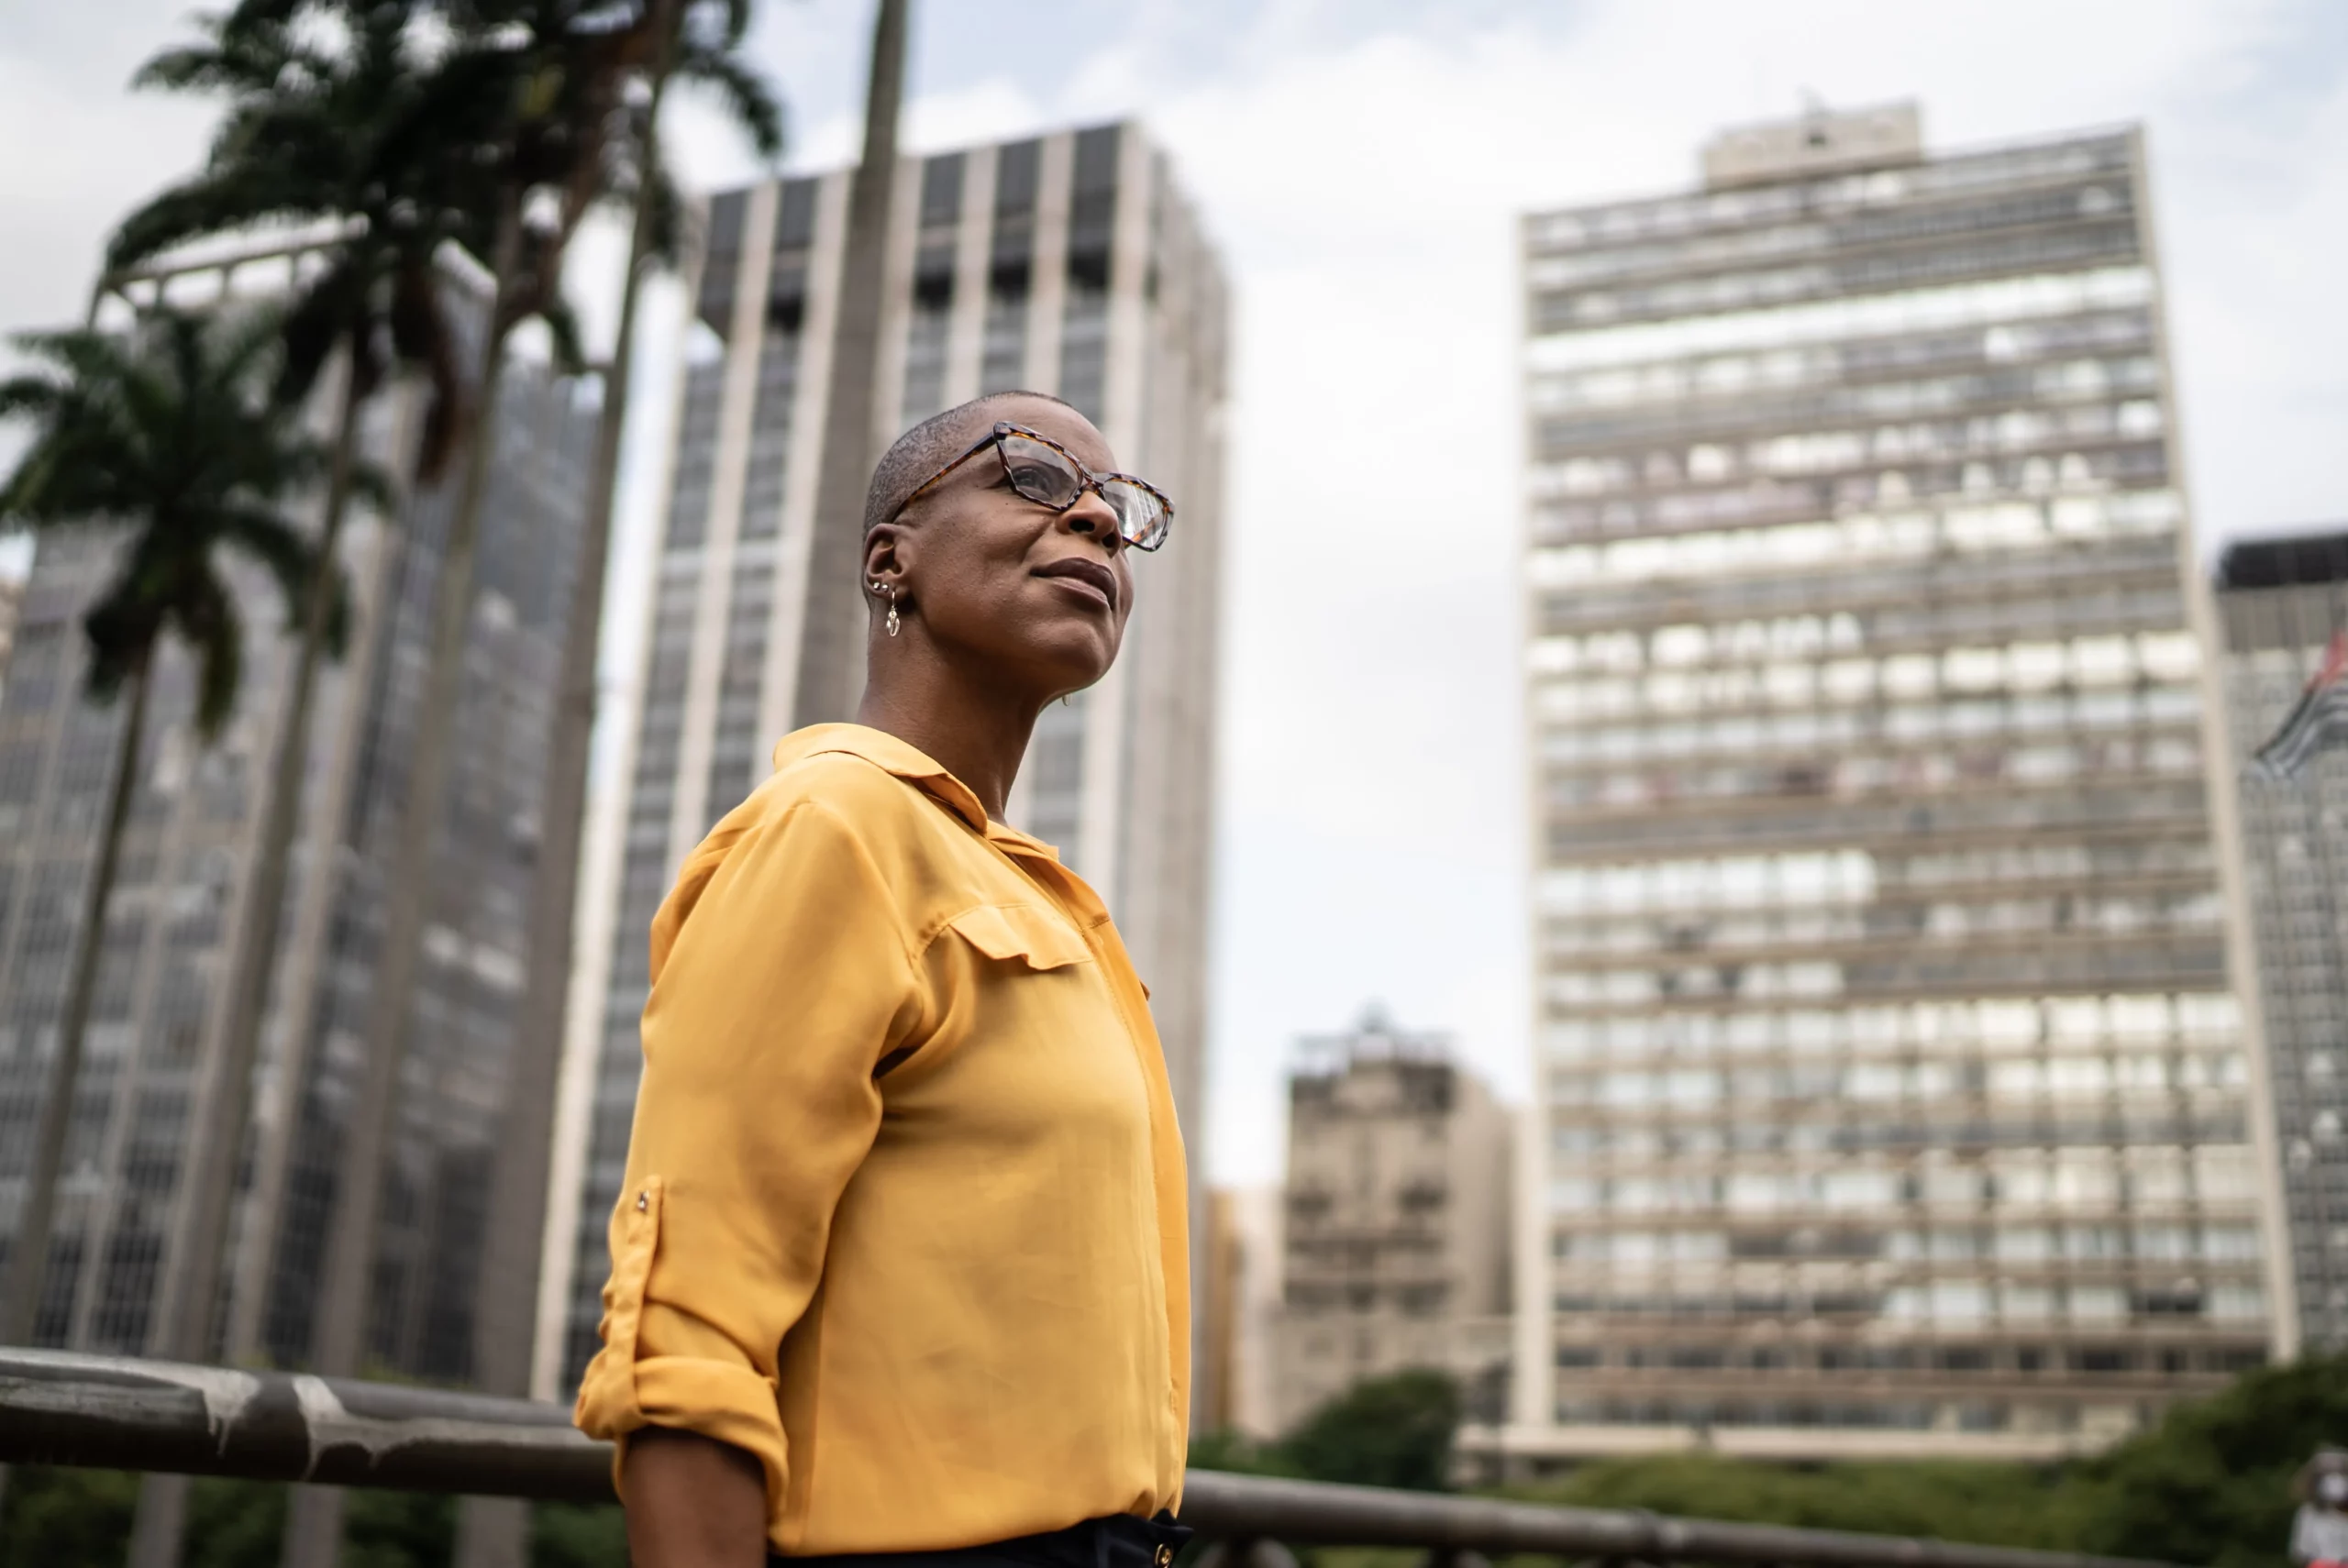 A black woman in a yellow shirt standing in front of tall buildings.